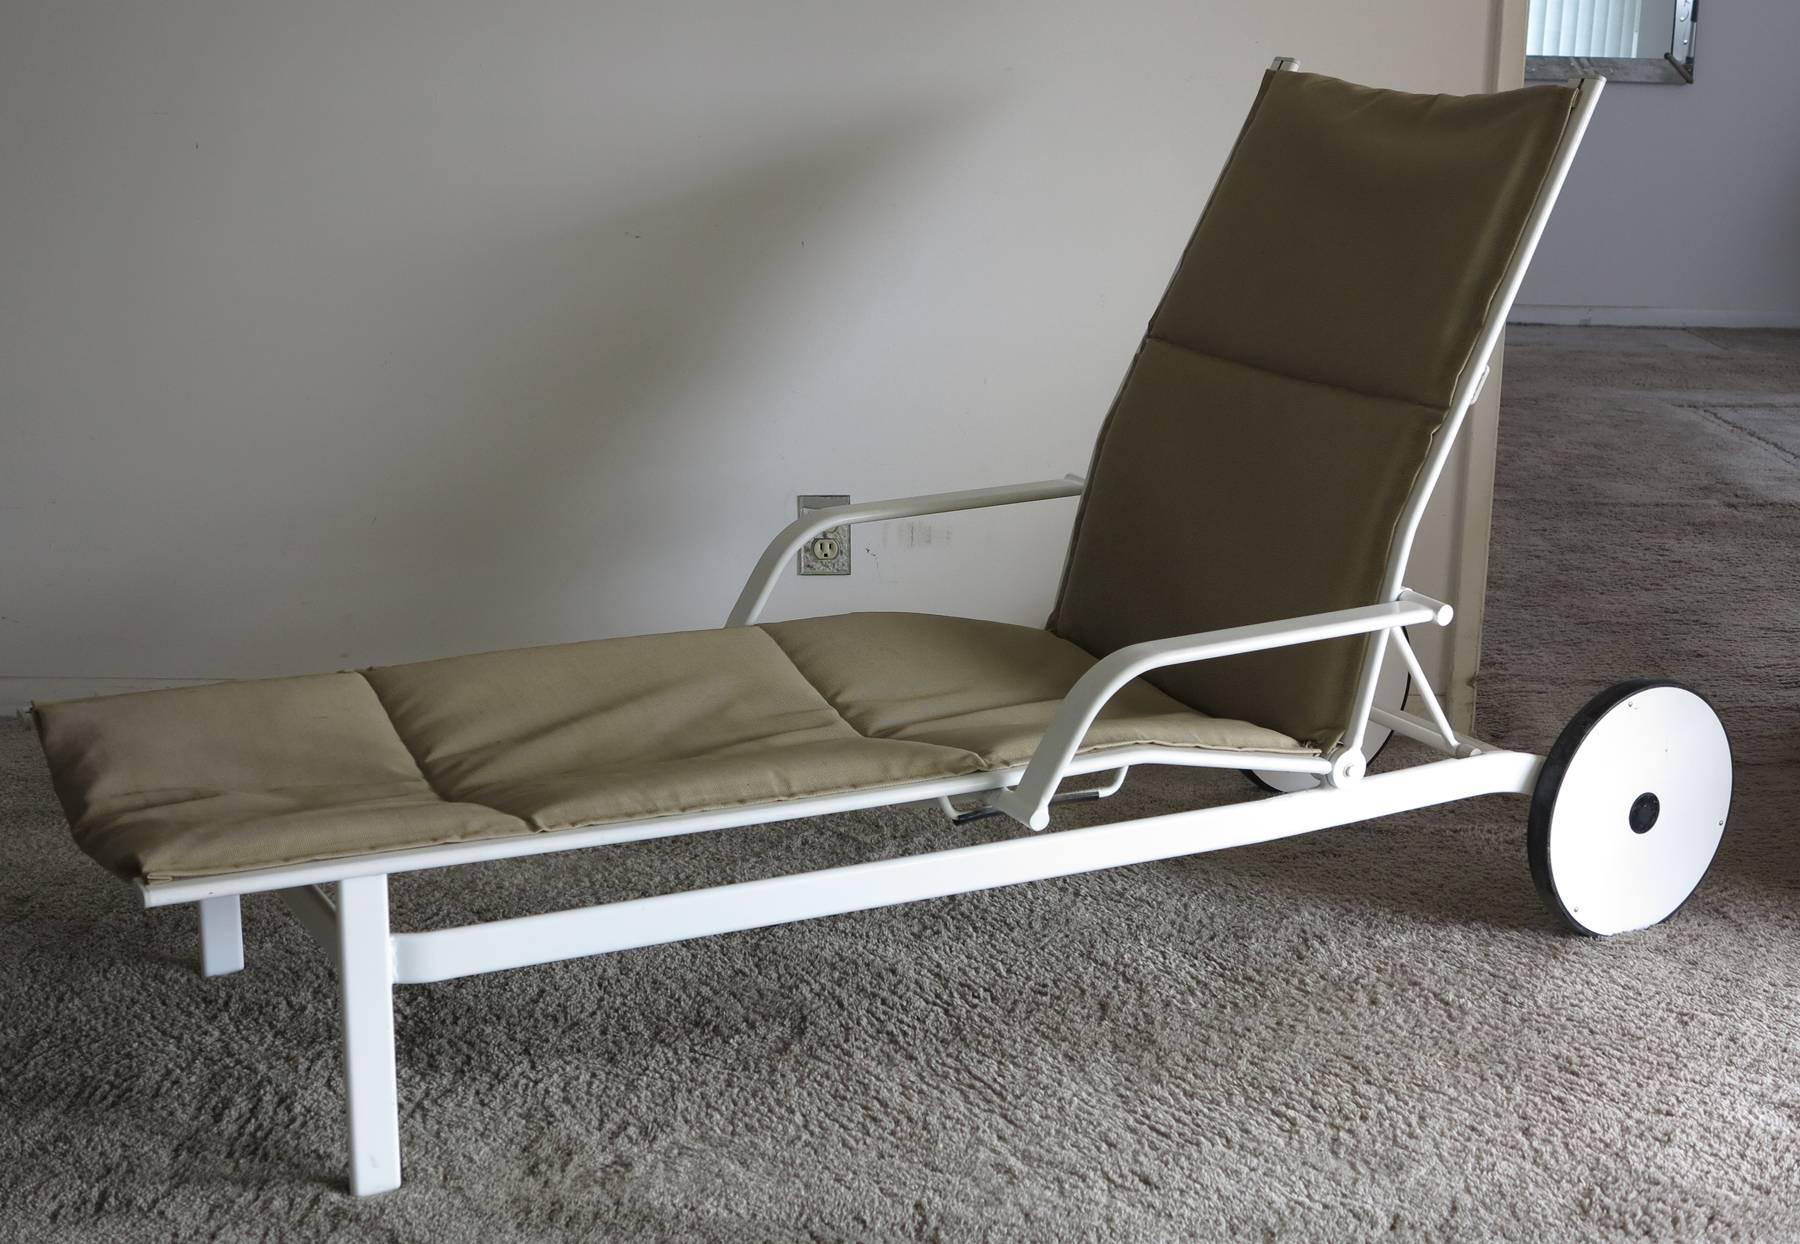 Chaise longue from the Elan collection which was sold from 1984-1988 by Brown Jordan.